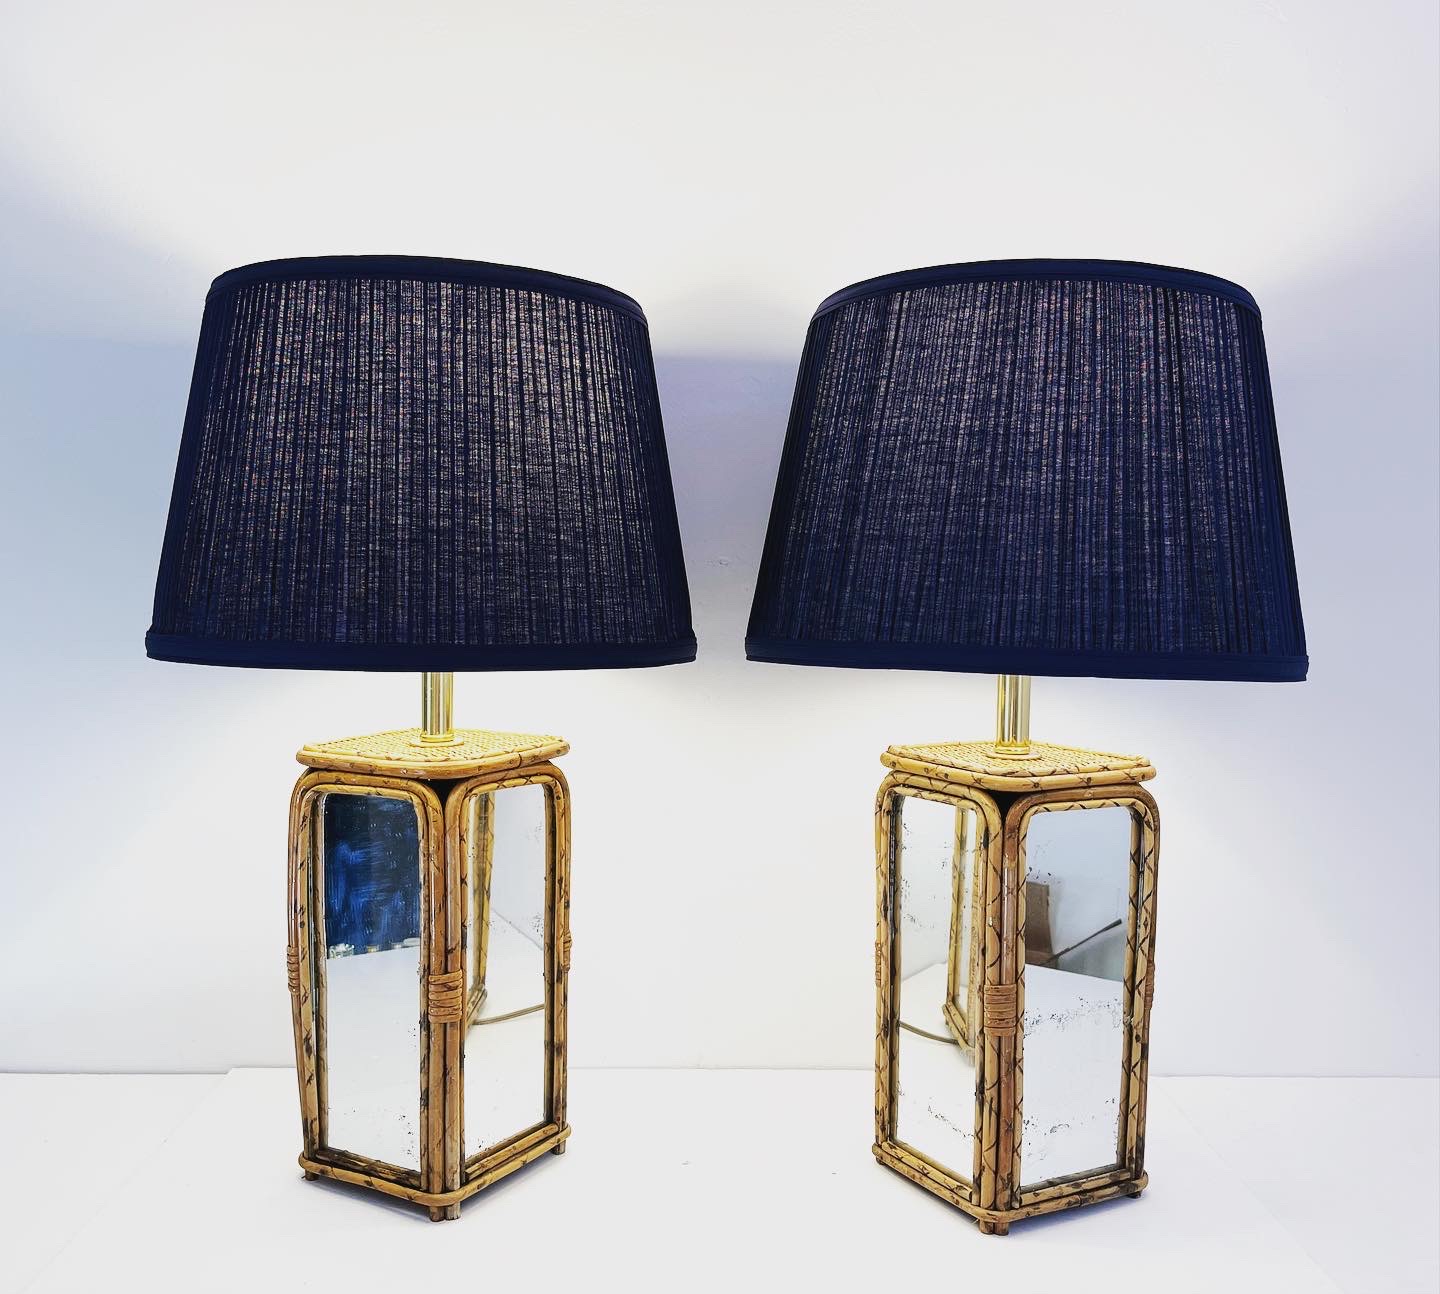 Mirrored Bamboo Lamps w/Shades, Pair~P77676197